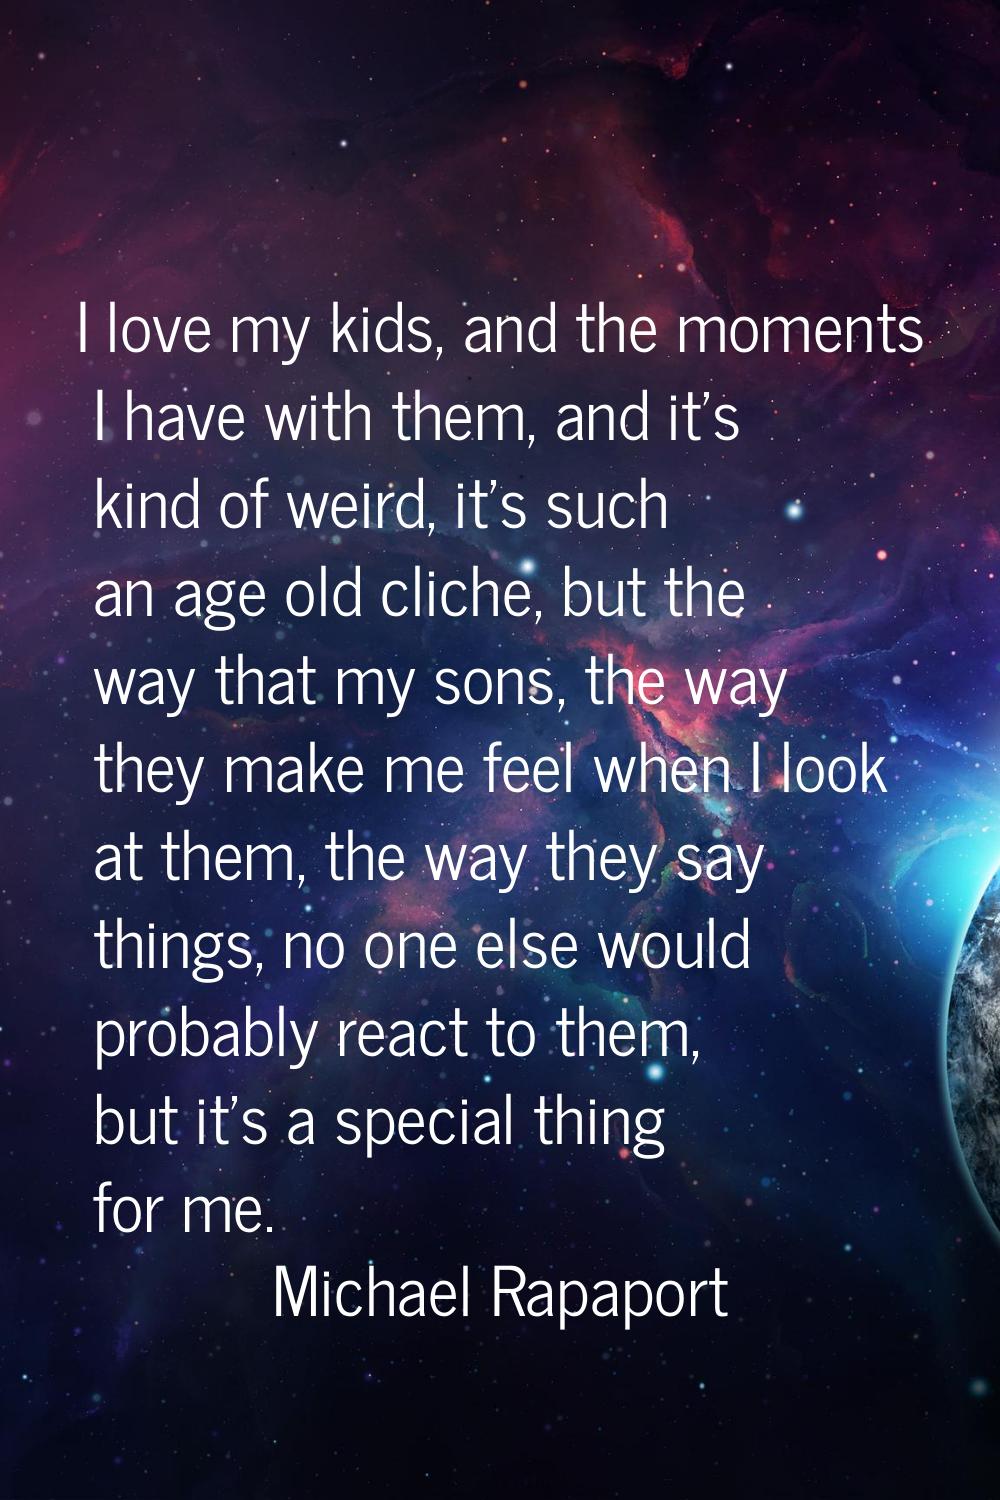 I love my kids, and the moments I have with them, and it's kind of weird, it's such an age old clic